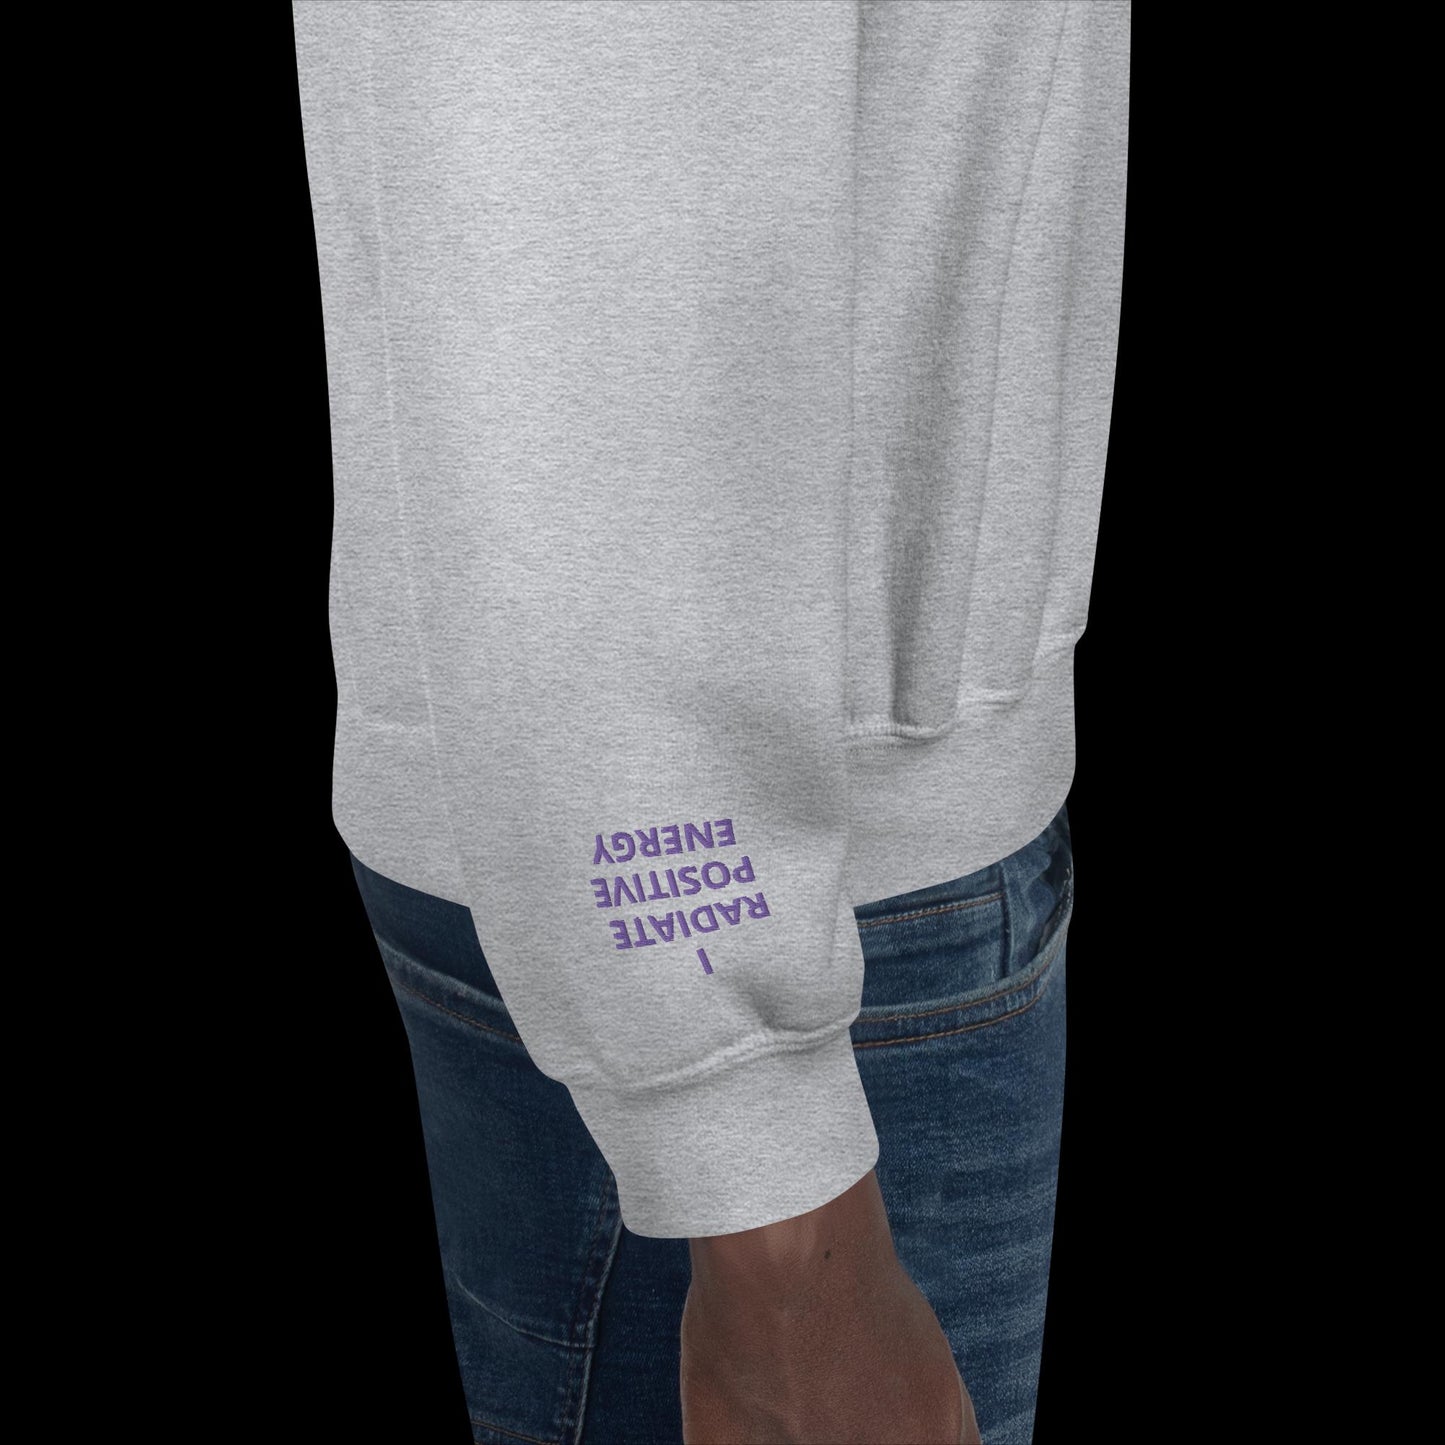 Unisex Sweatshirt - with affirmations on the wrists.